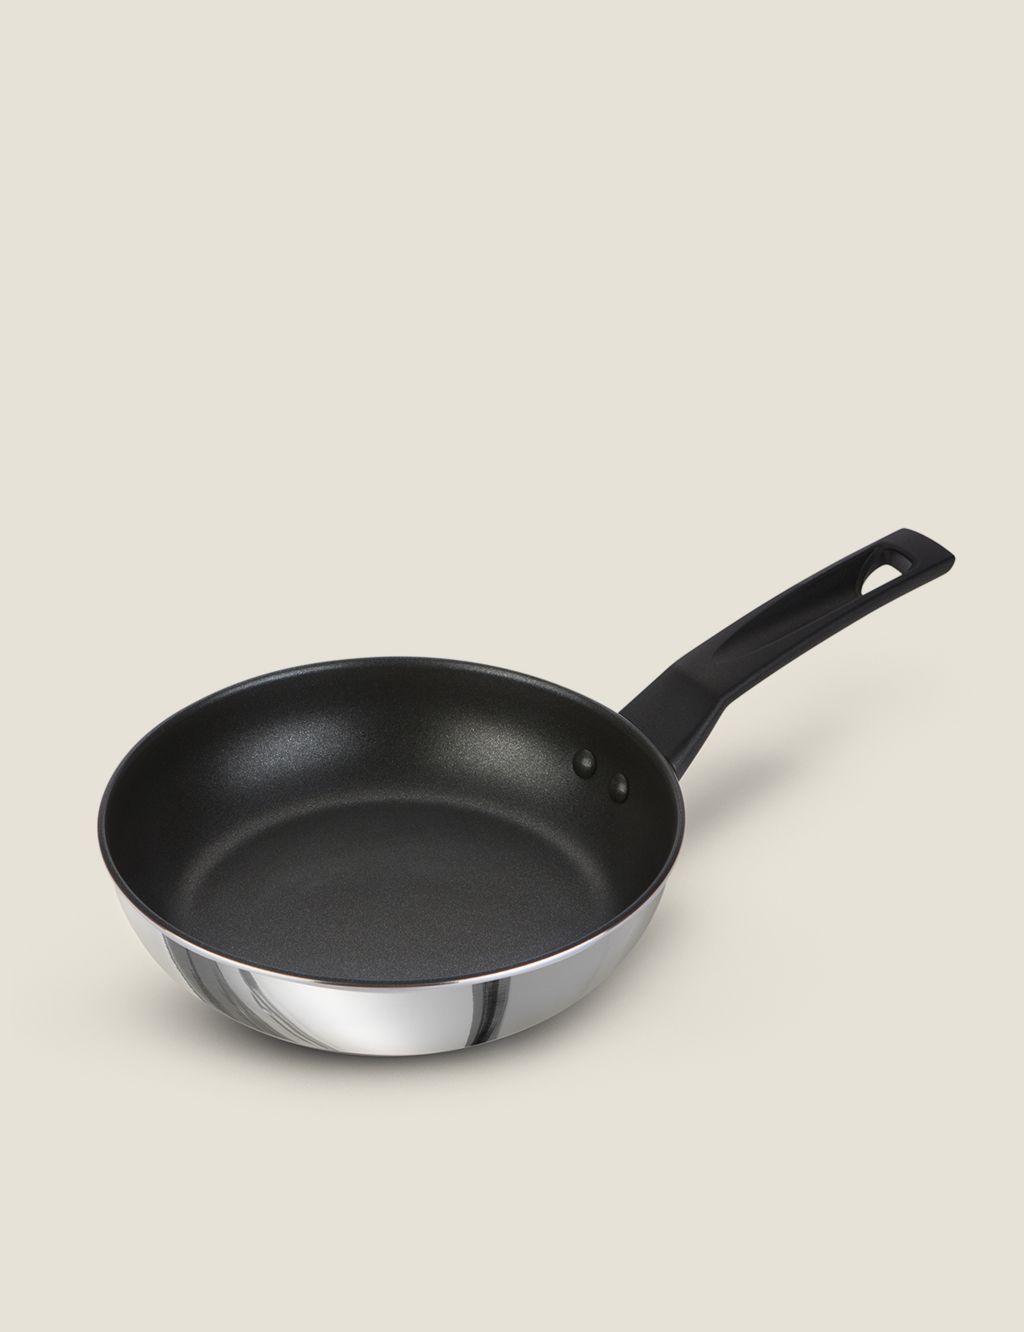 Stainless Steel 21cm Frying Pan image 1